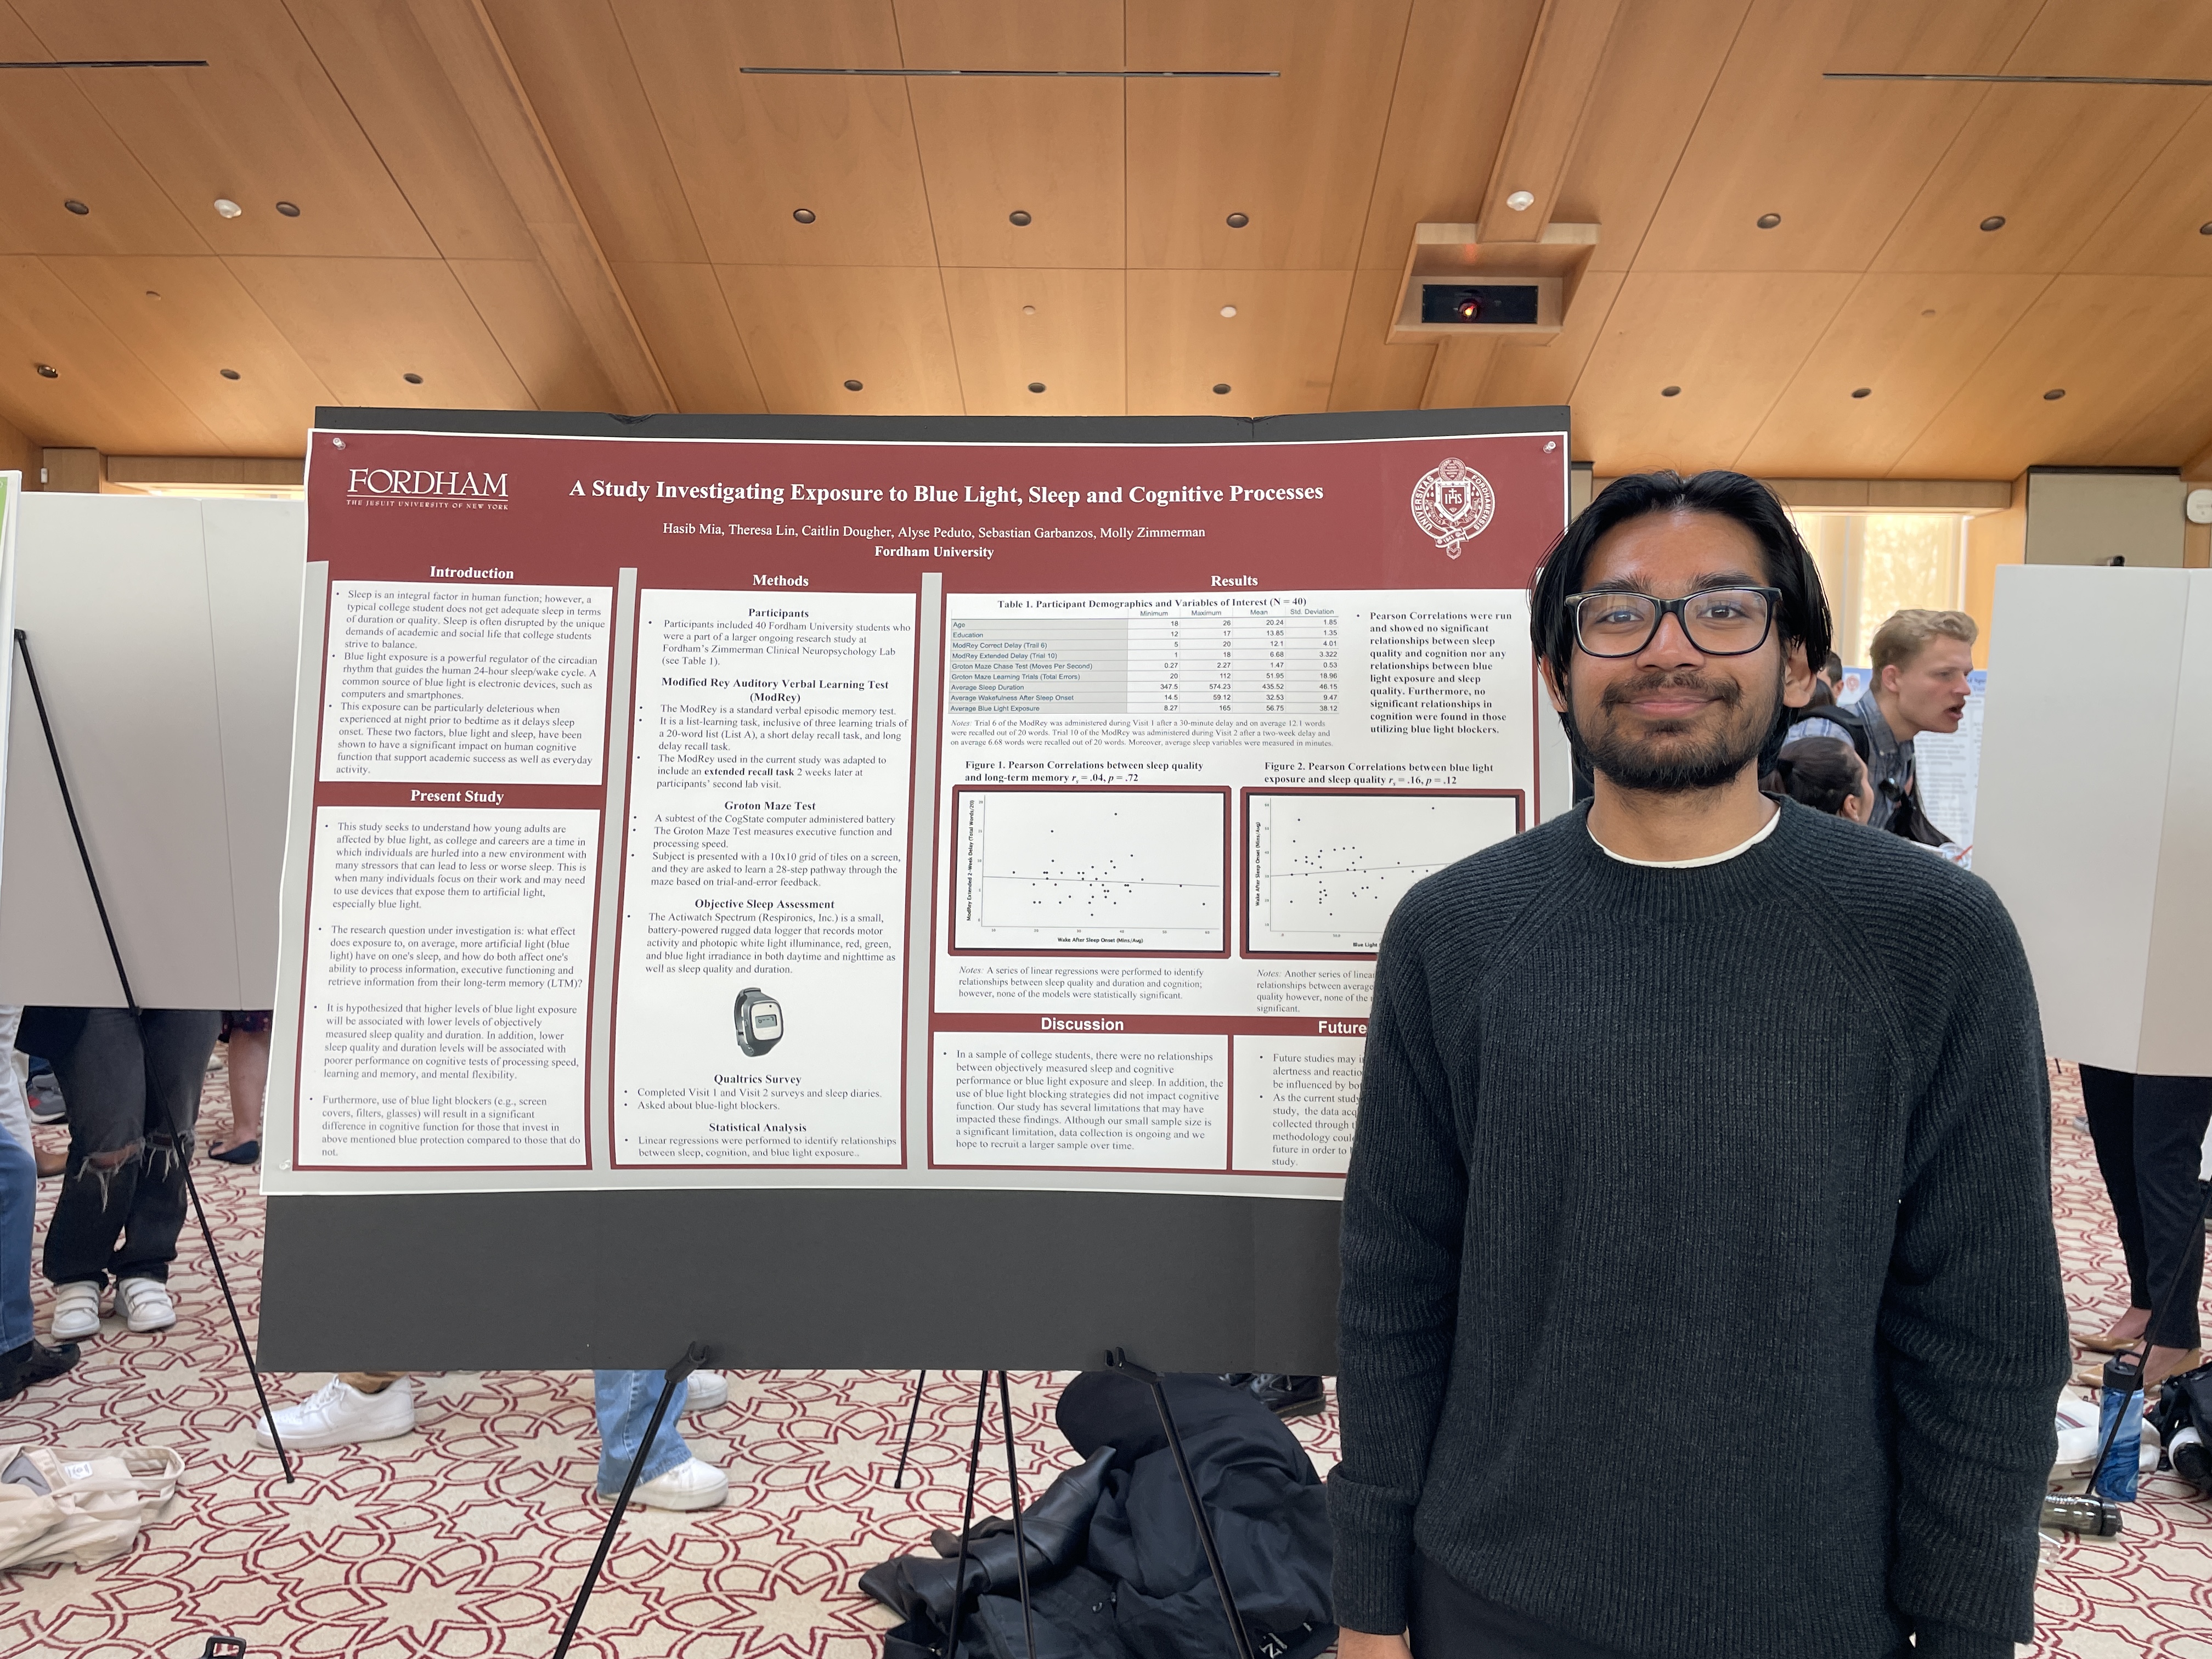 Student in front of poster presentation